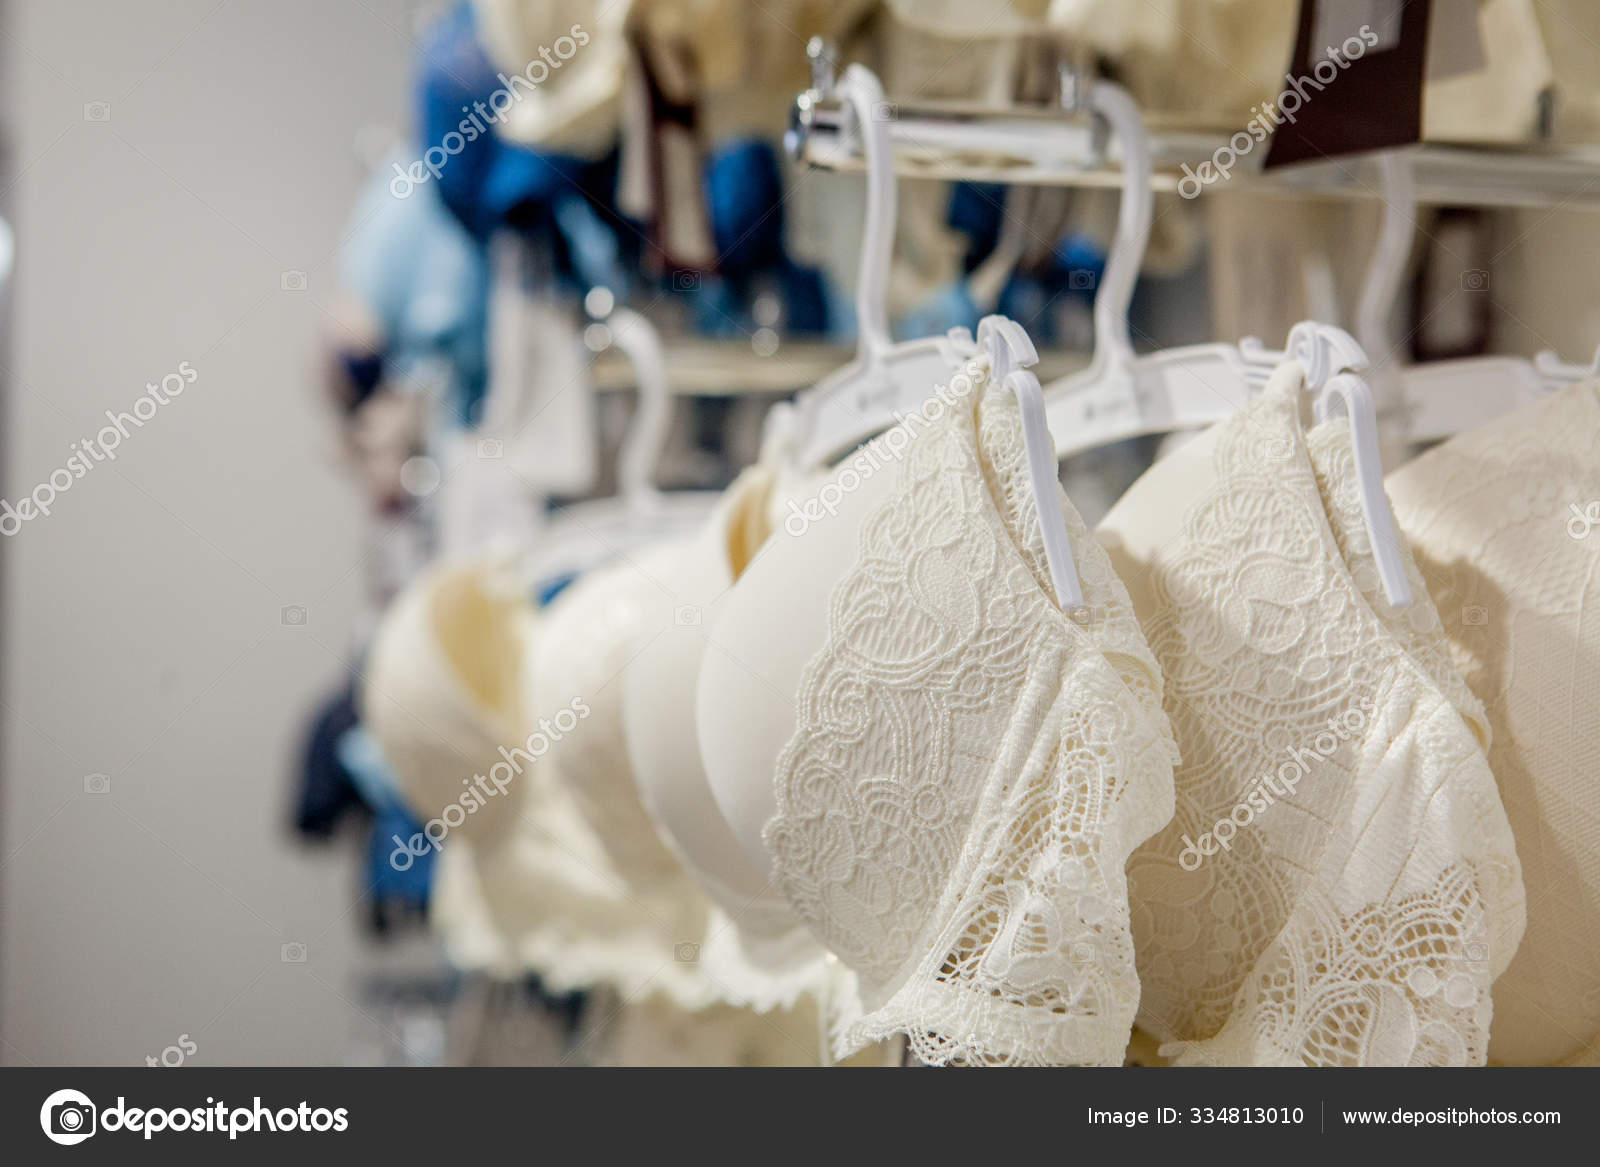 Shop Woman Underwear Clothes, Lingerie On Rack. Retail Shop, Store. Stock  Photo, Picture and Royalty Free Image. Image 126647257.